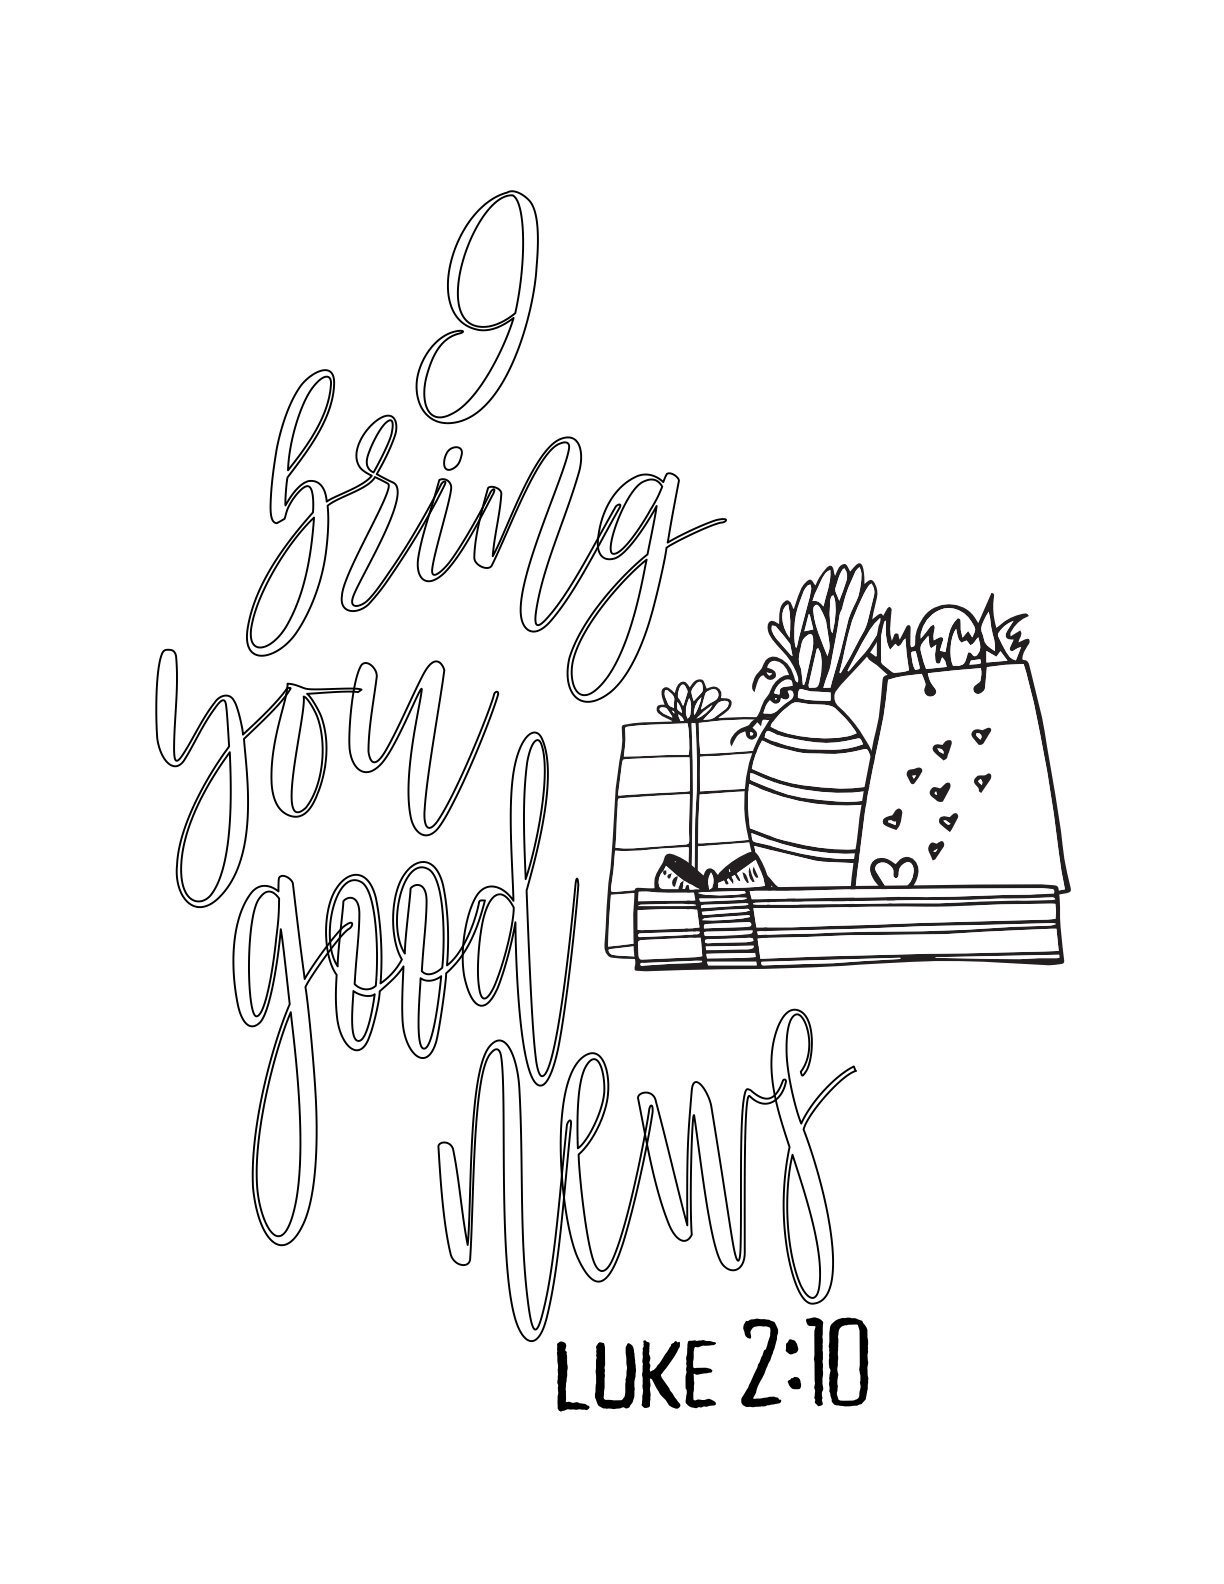 Free Printable Advent Coloring Page - Luke 2:10 - Christmas Christian Colorable CLICK HERE TO DOWNLOAD YOUR FREE PAGE